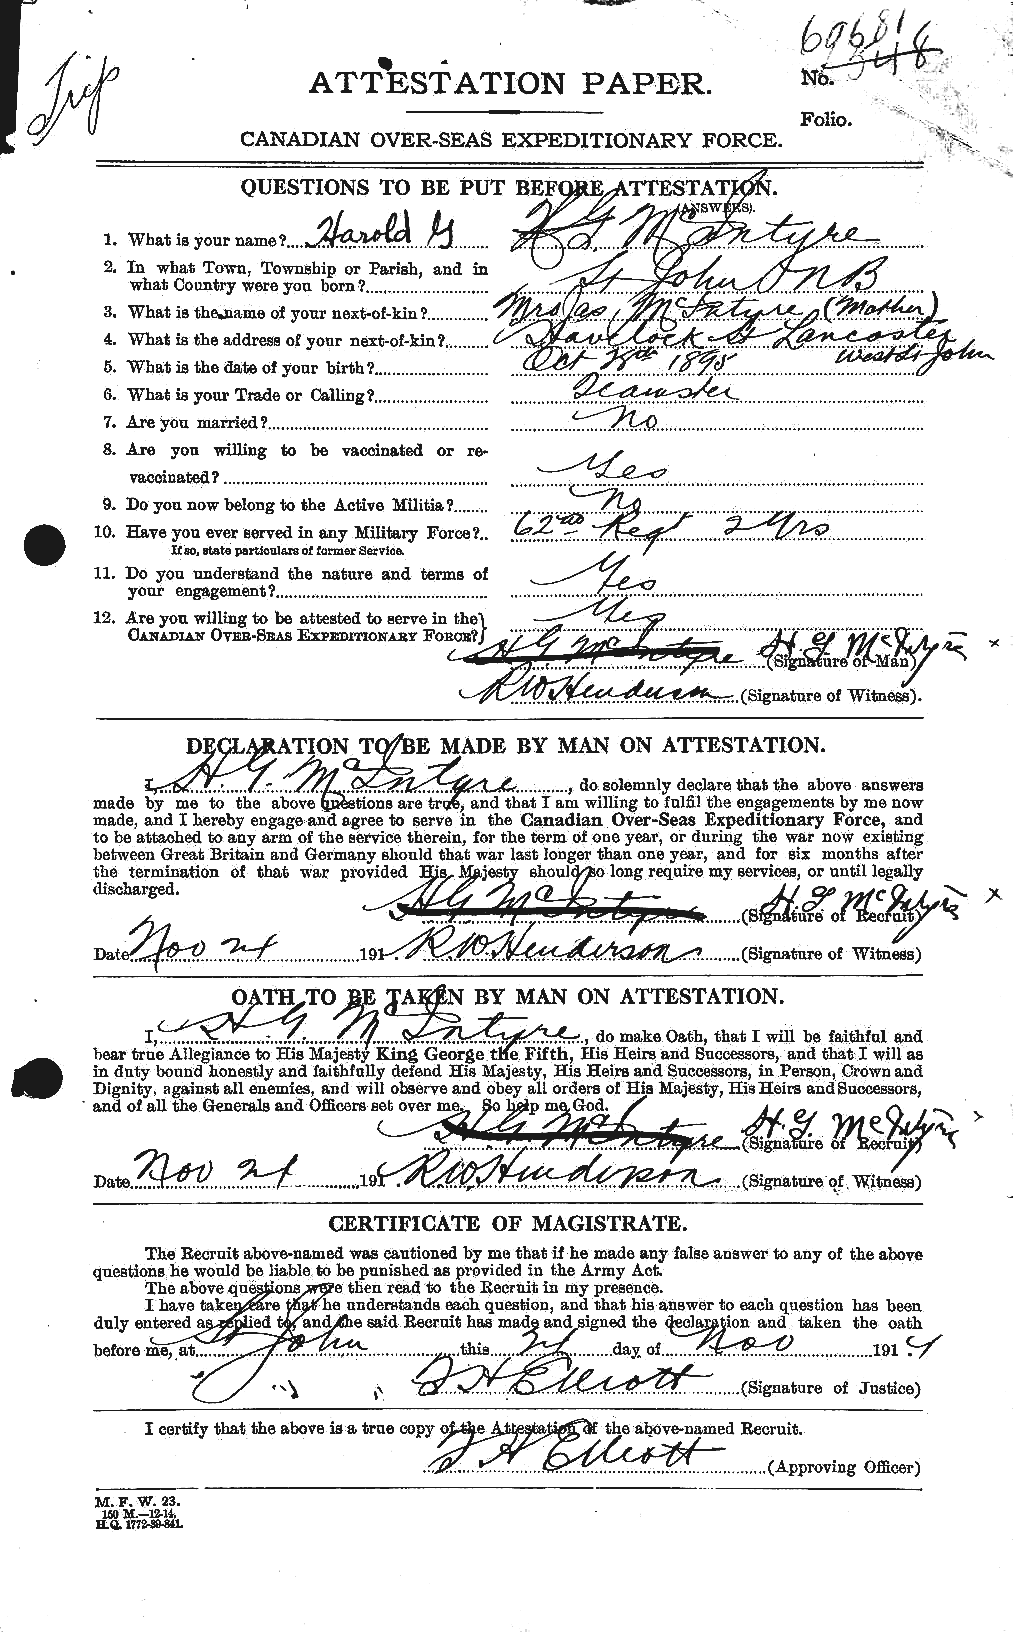 Personnel Records of the First World War - CEF 527407a